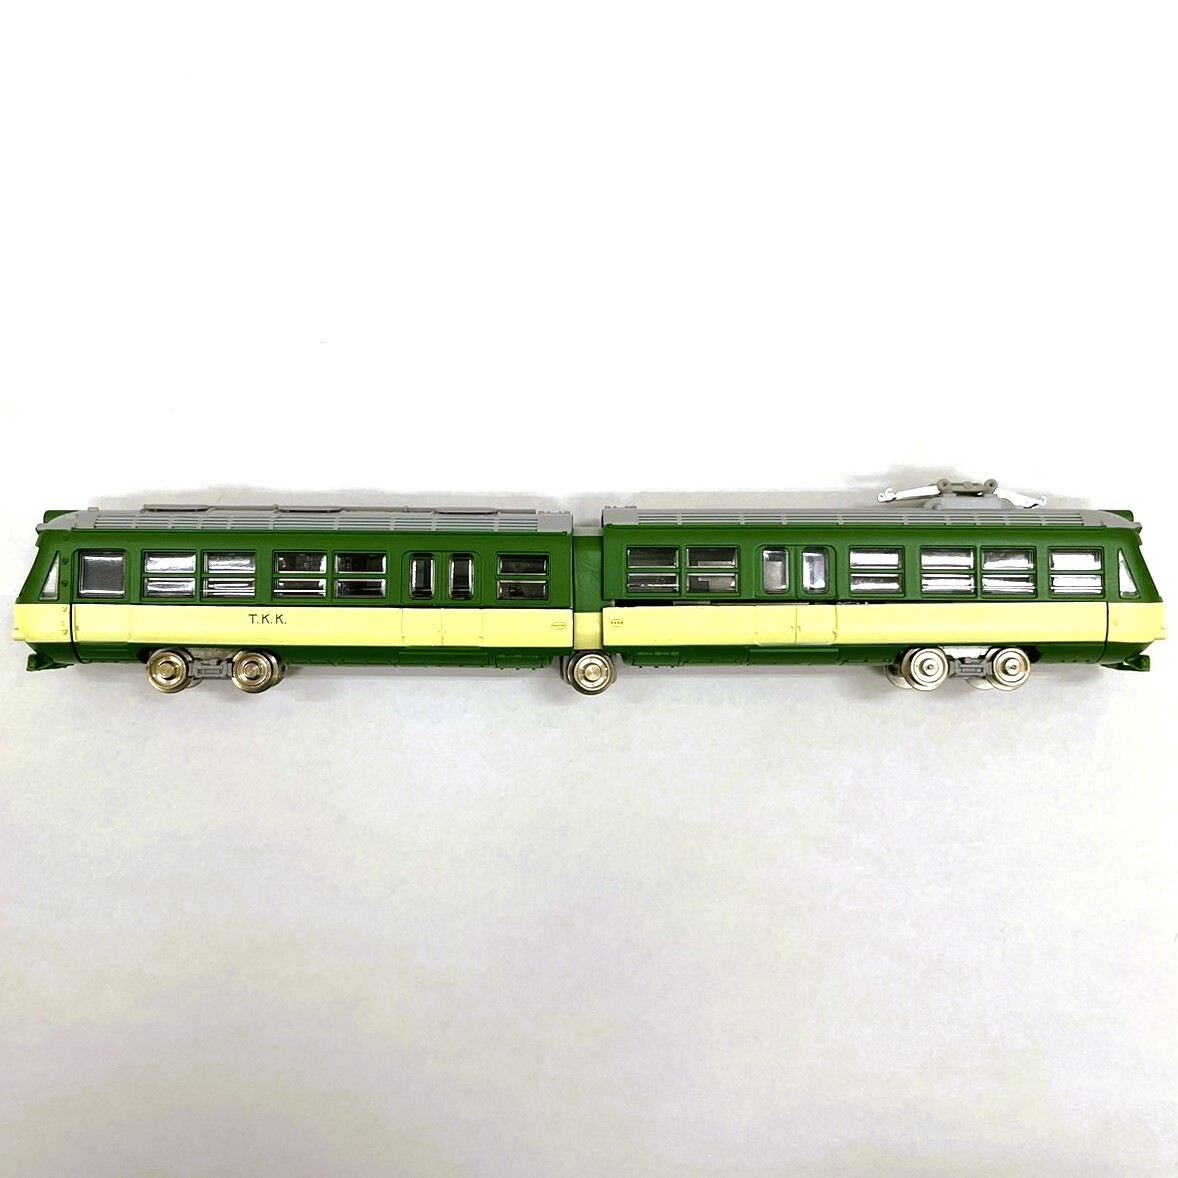 *[MODEMO]NT100 Tokyu Tama ..te is 200 shape green / green color railroad model train toy toy antique collection *15419